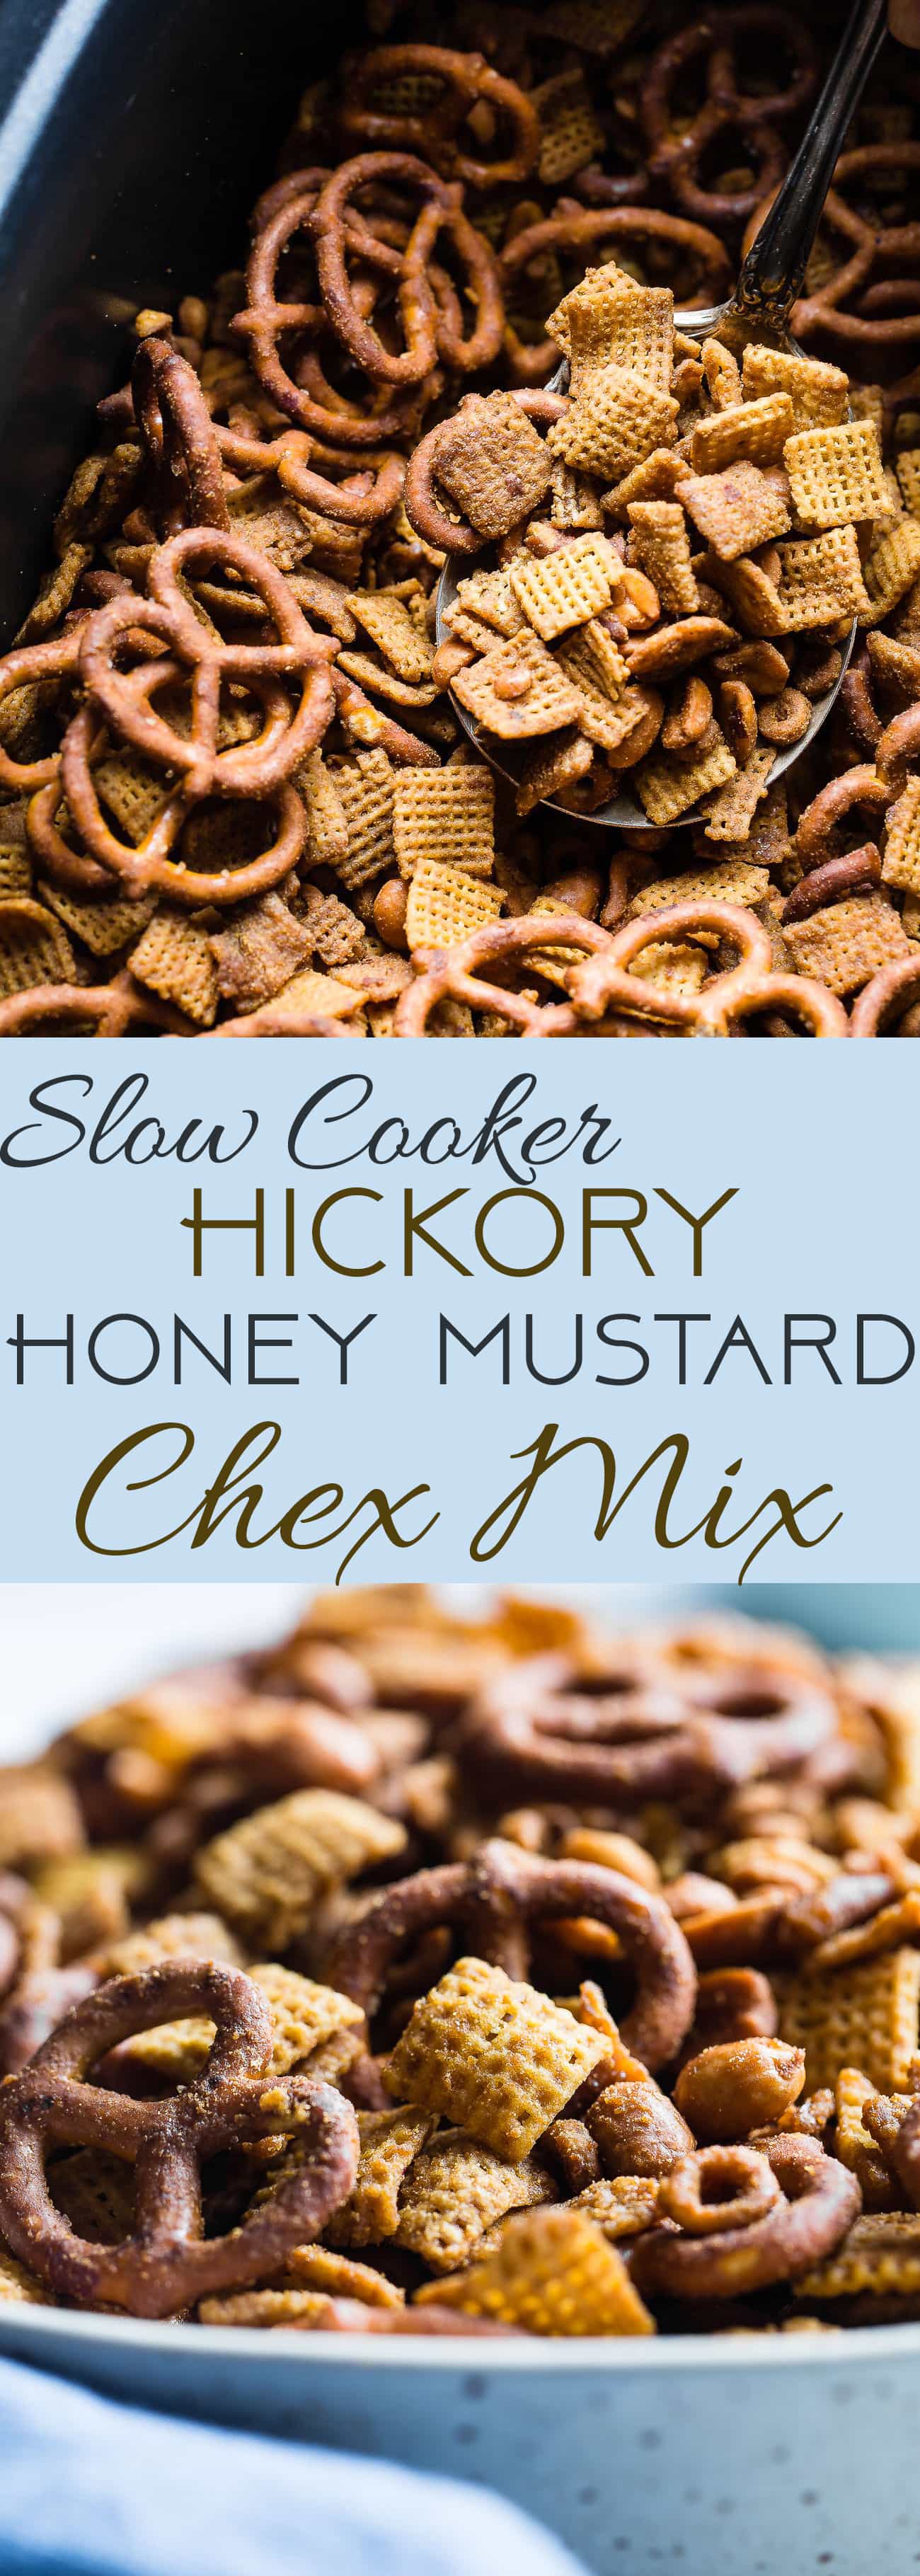 Hickory Honey Mustard Homemade Crock Pot Chex Mix - This dairy and gluten free Chex Mix is made in the slow cooker so it's super easy and hands off! It's got addicting smoky sweet flavors and is perfect for parties or movie nights! | Foodfaithfitness.com | @FoodFaithFit | Chex mix recipe. sweet chex mix. healthy chex mix. slow cooker chex mix. savory chex mix. easy chex mix